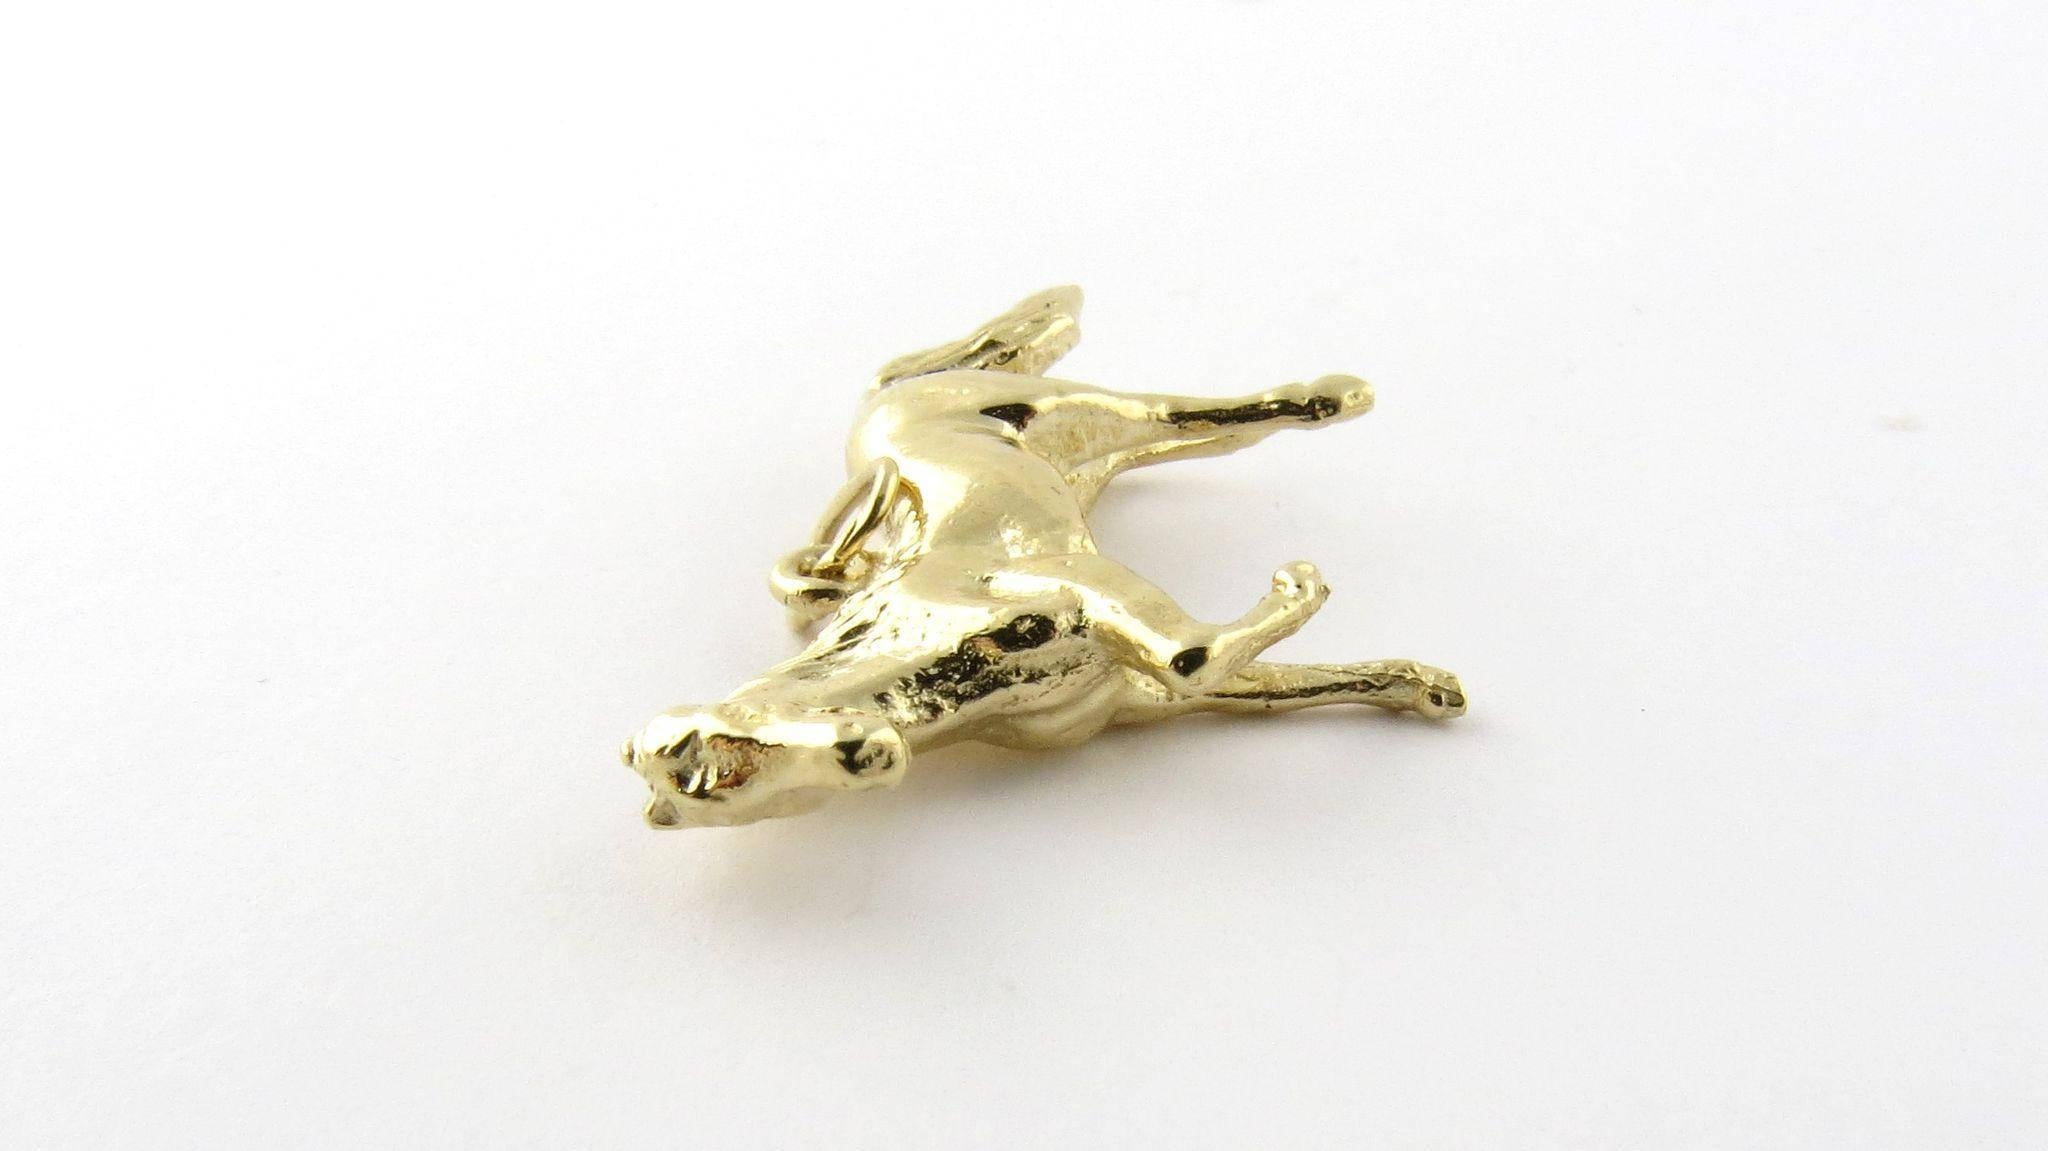 Vintage 14K yellow gold 3-D horse pendant. 

Trotting in for the races or leisurely grazing in a pasture, this detailed horse pendant is sure to grace any chain. 

Measures: 32mm long head to tail. 23mm tall head to hoof. 6mm thick. 

Weighs: 8.6g,